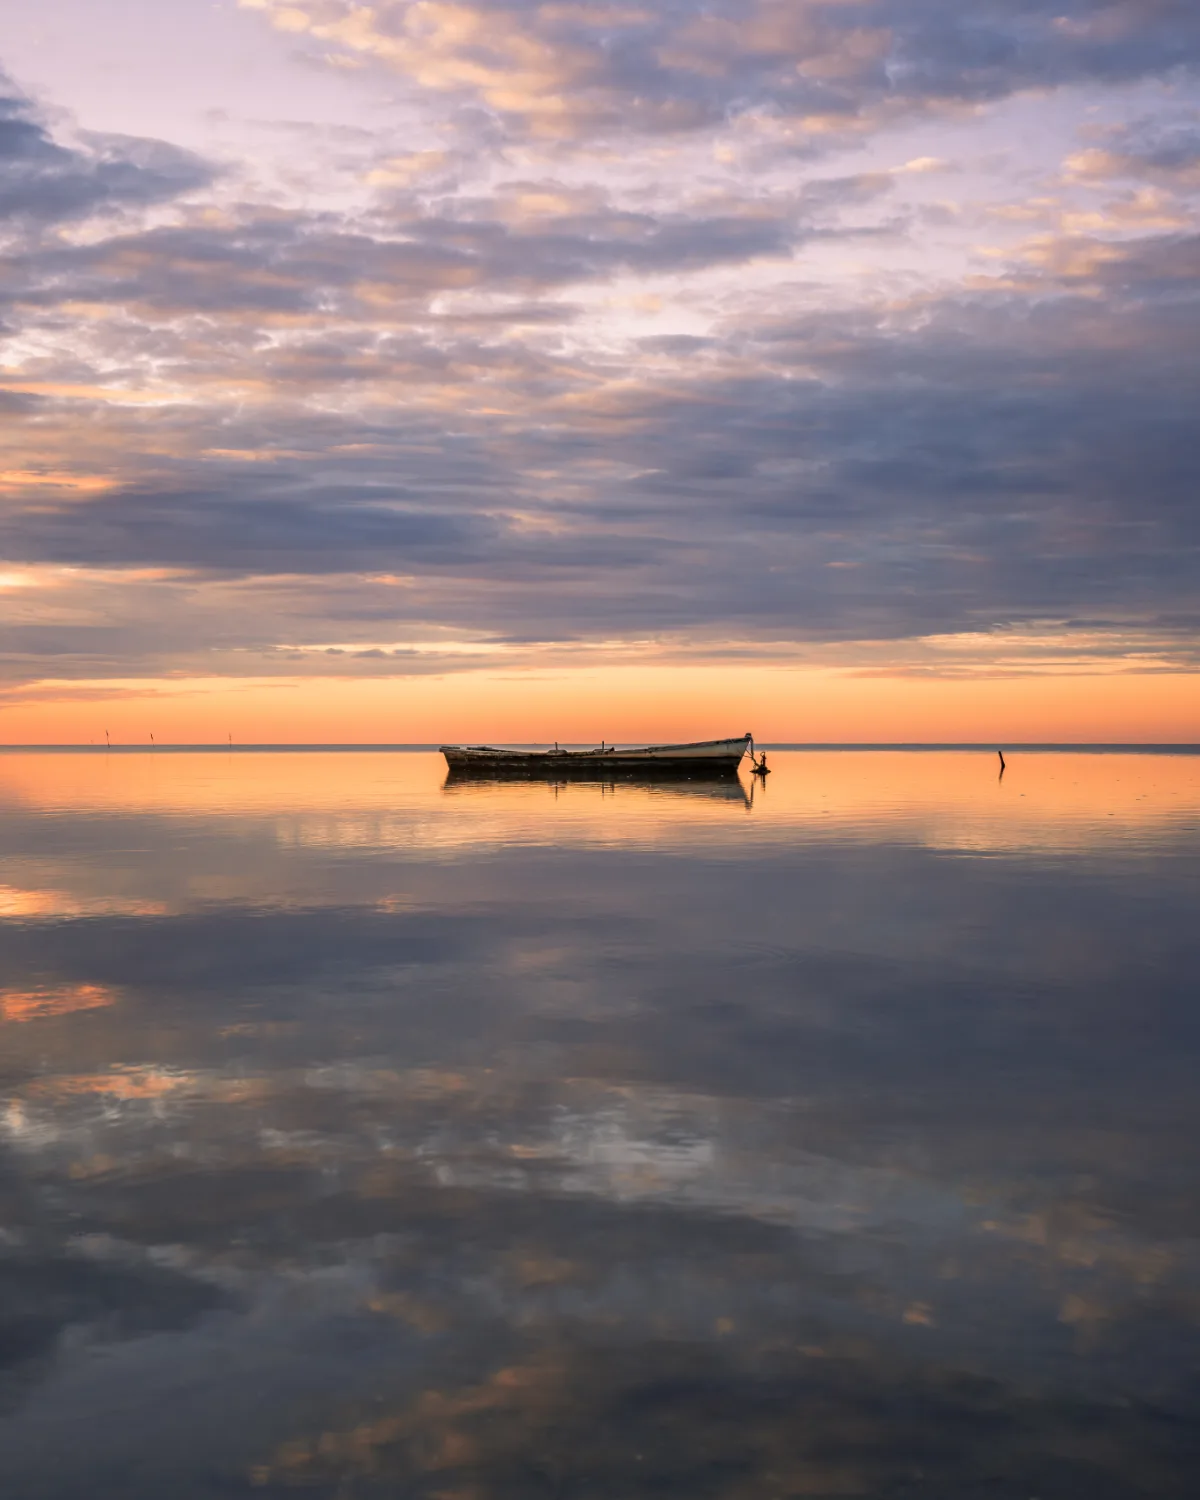 A canoe peacefully drifts in calm water at sunset.